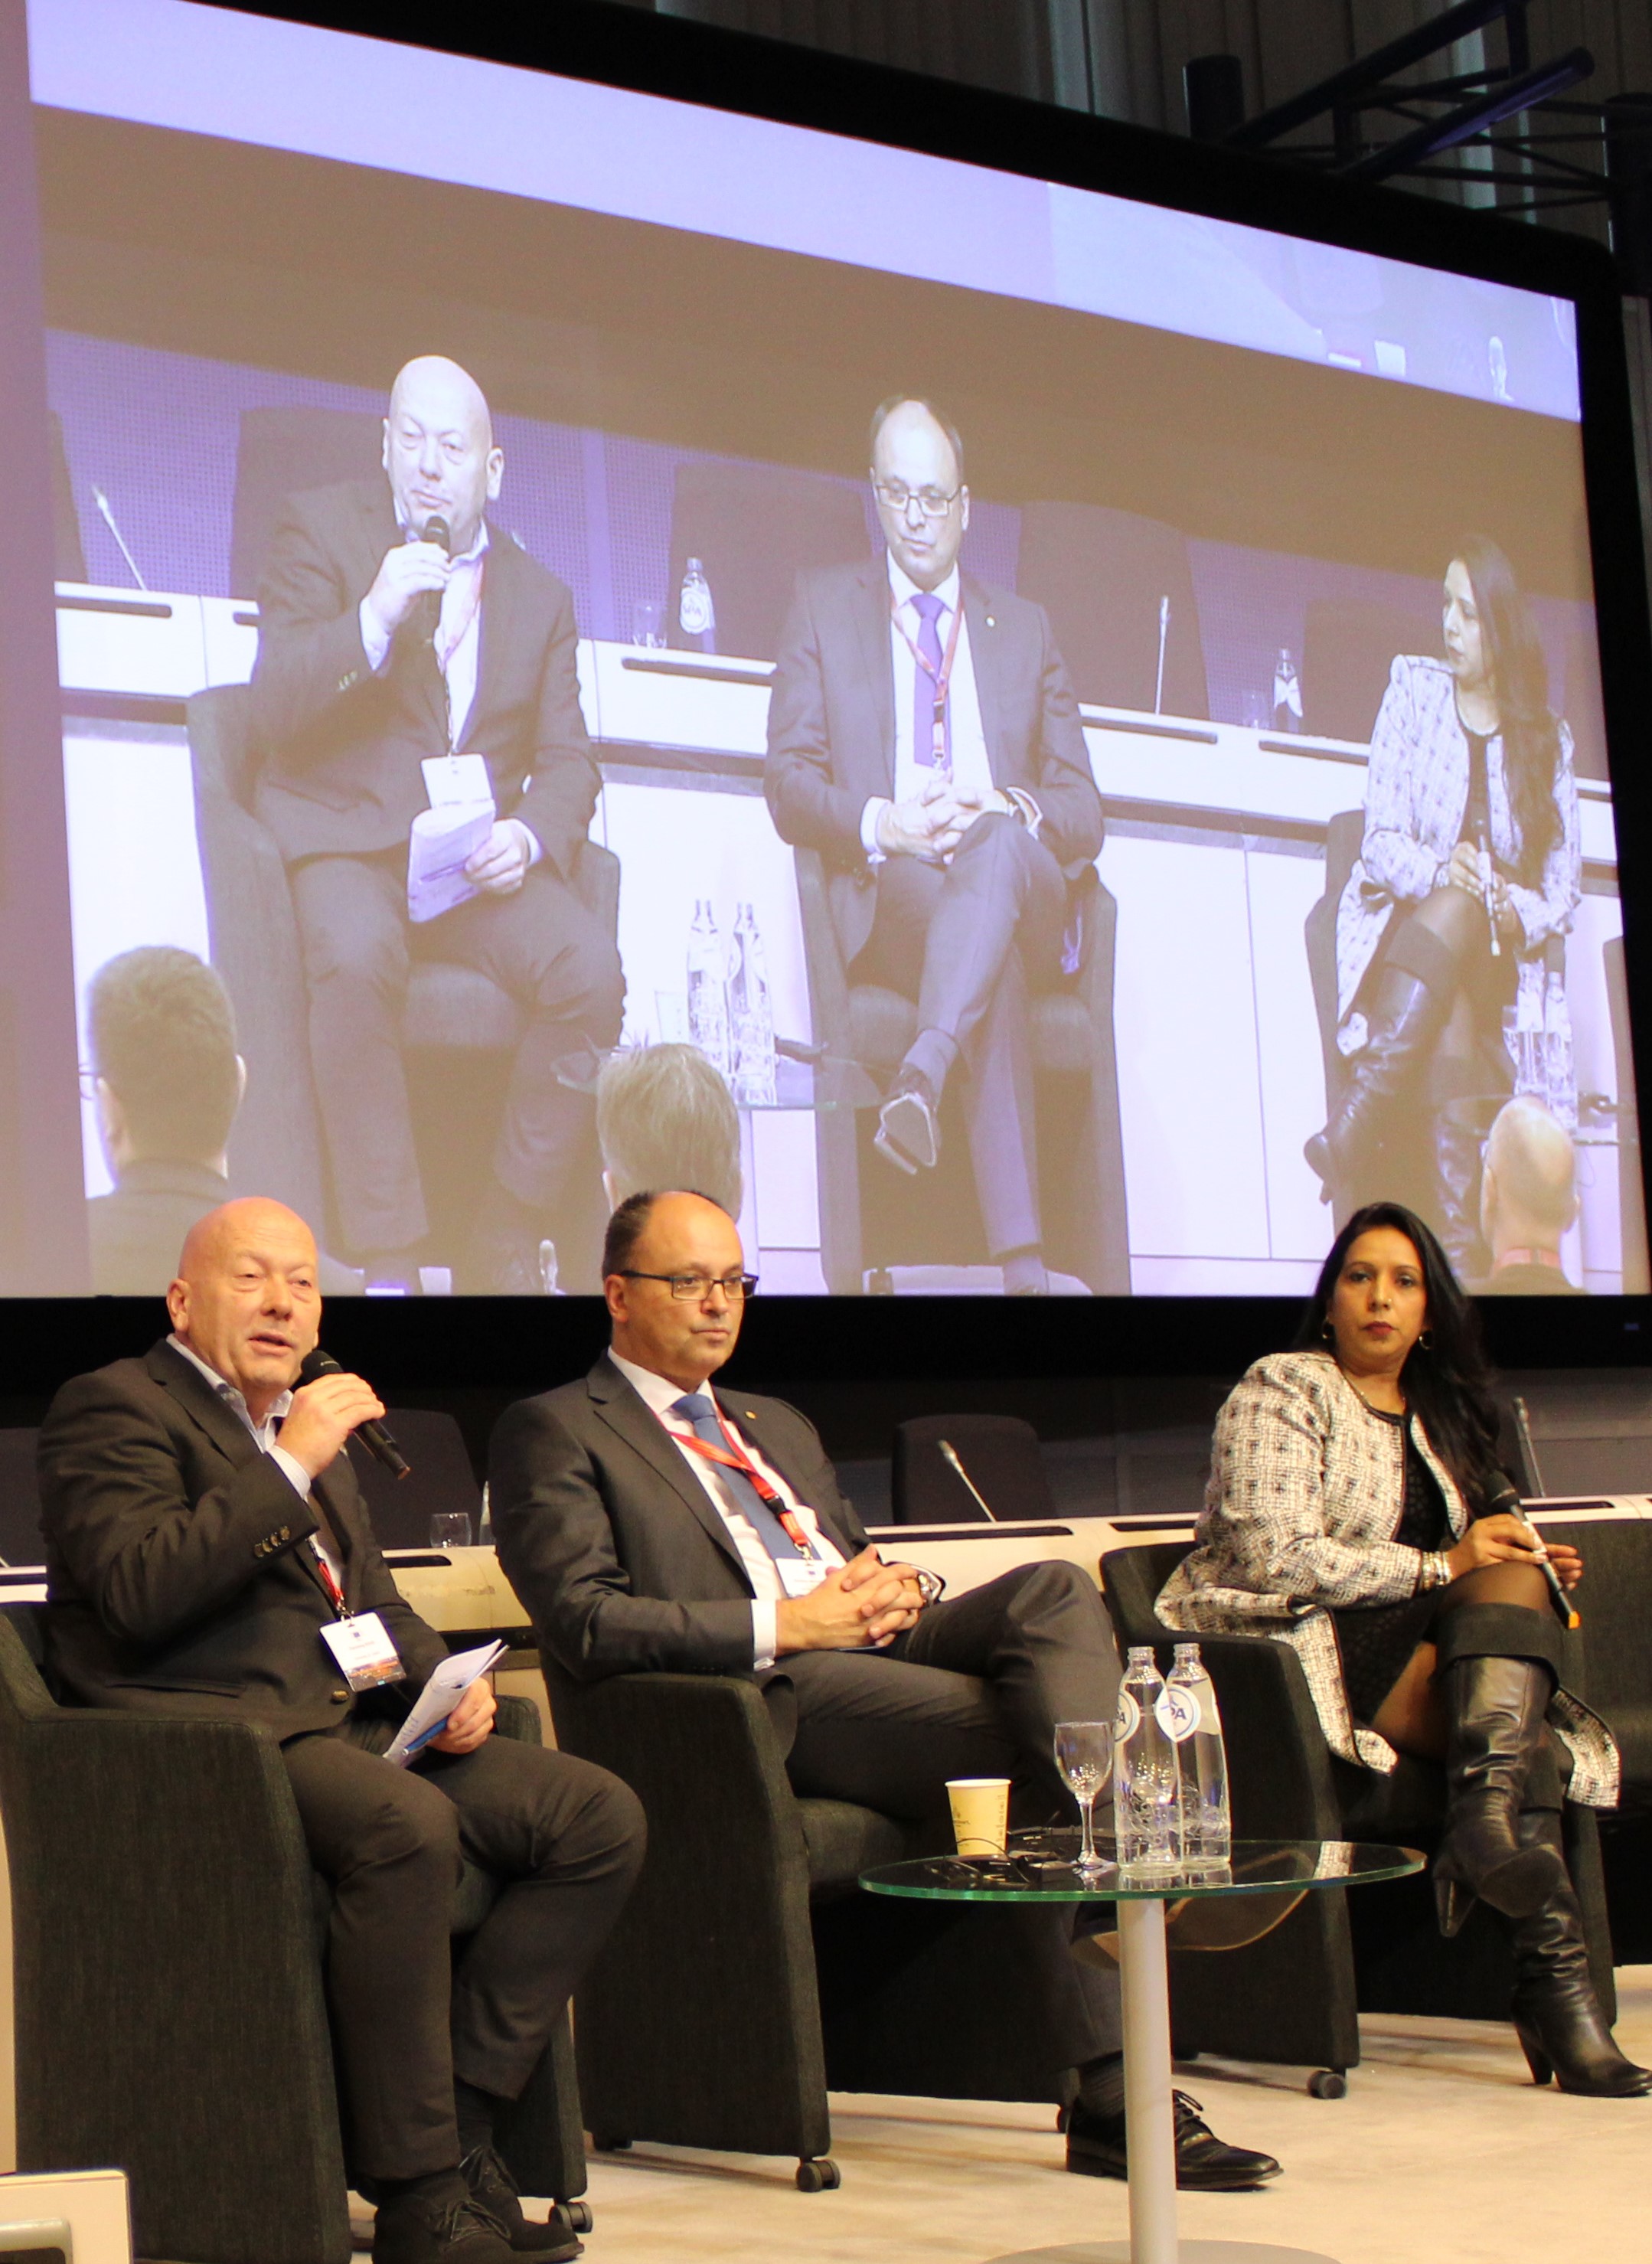 Panel Session 2, from left to right Flemming Ruud, Gunther Meggeneder and Jenitha John